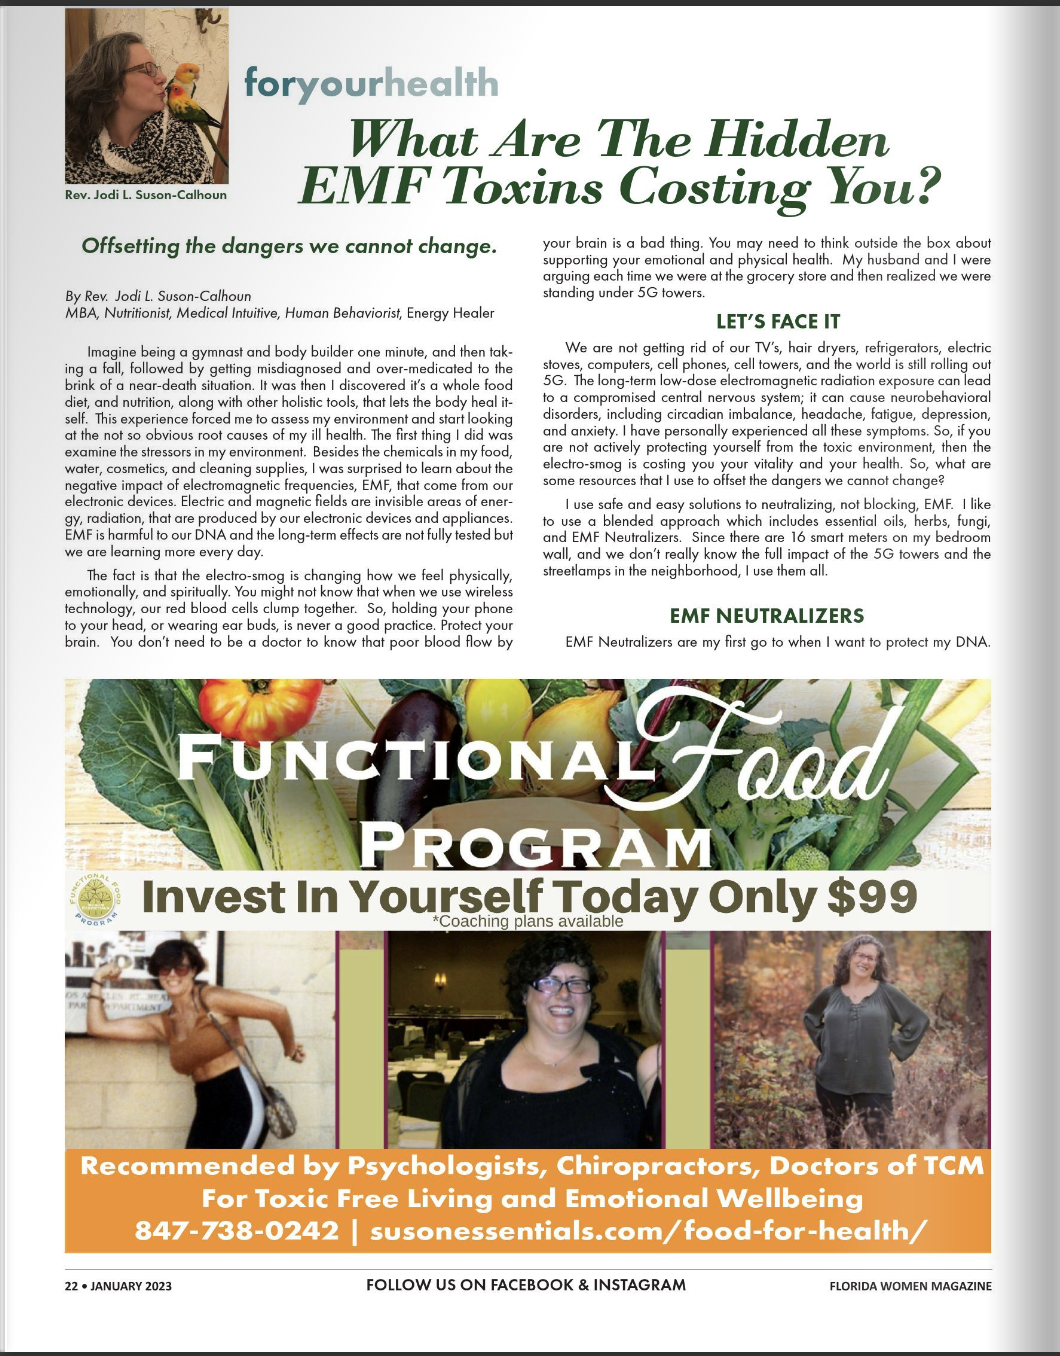 What Are The Hidden EMF Toxins Costing You?